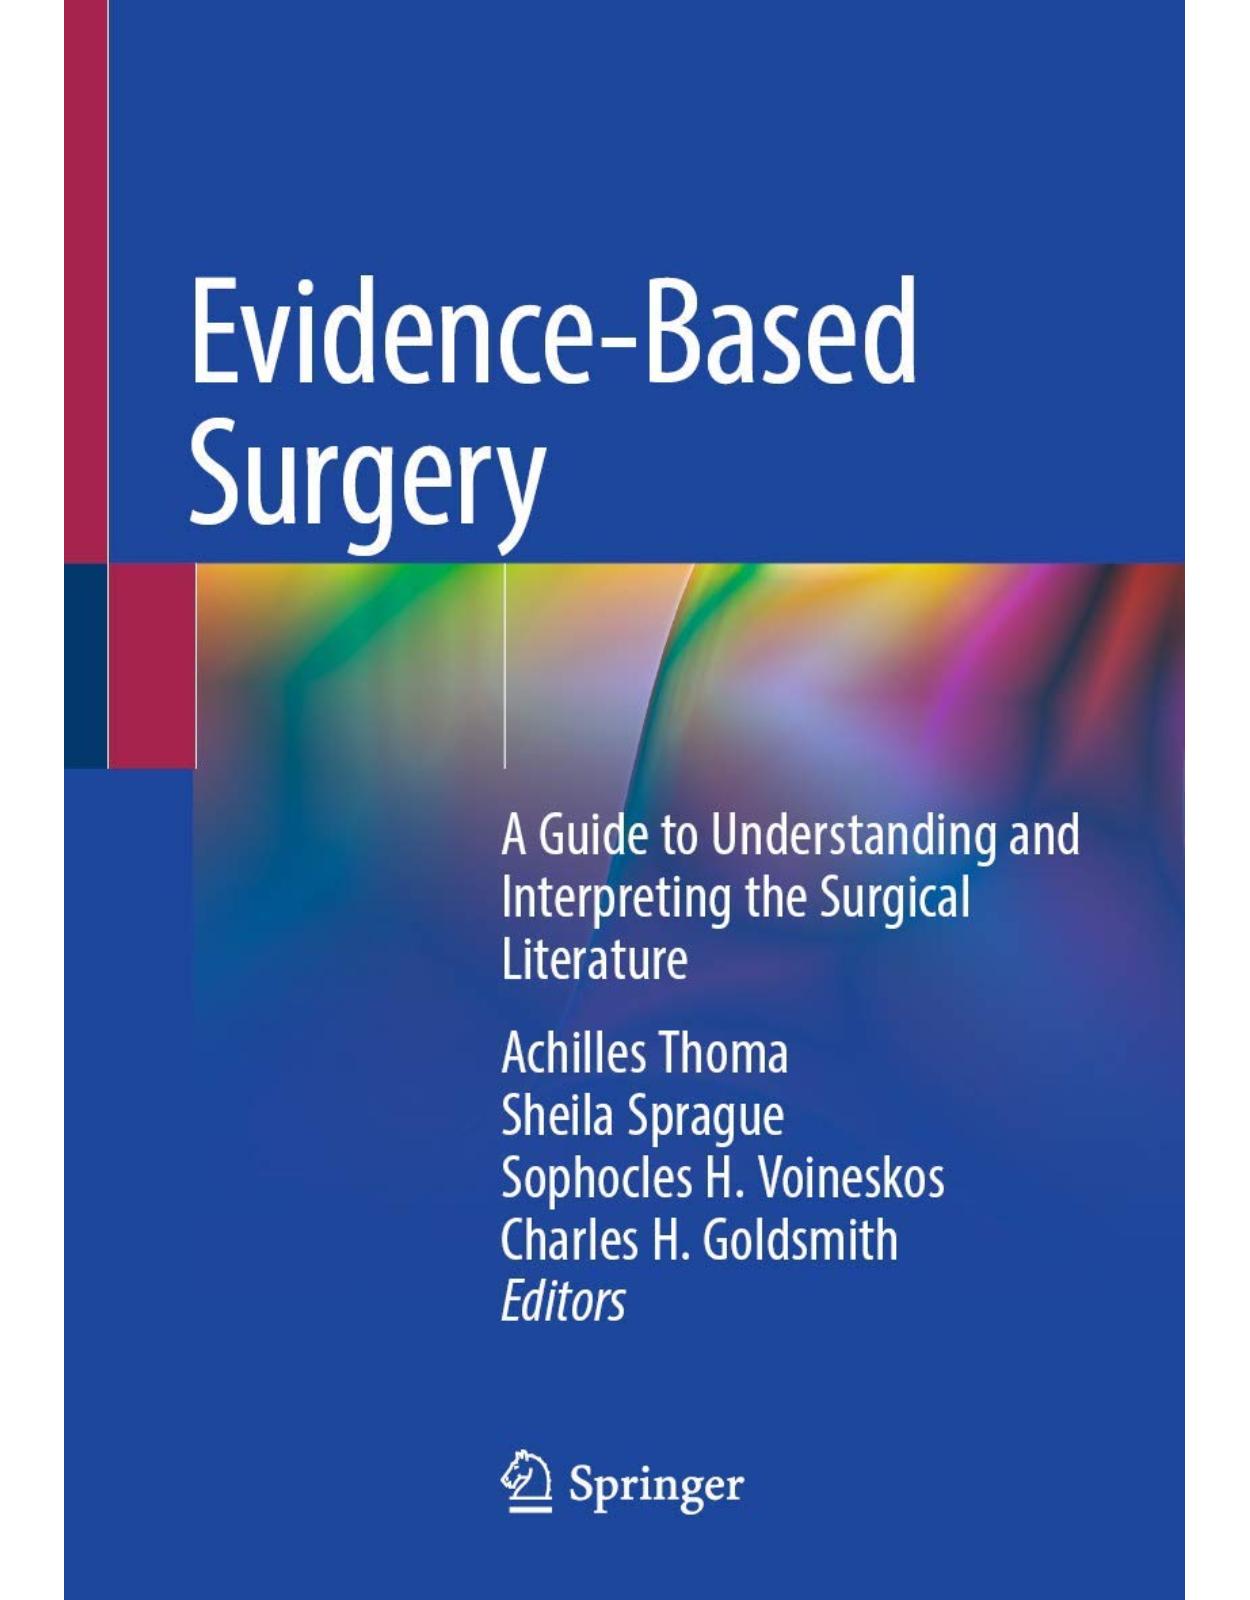 Evidence-Based Surgery: A Guide to Understanding and Interpreting the Surgical Literature